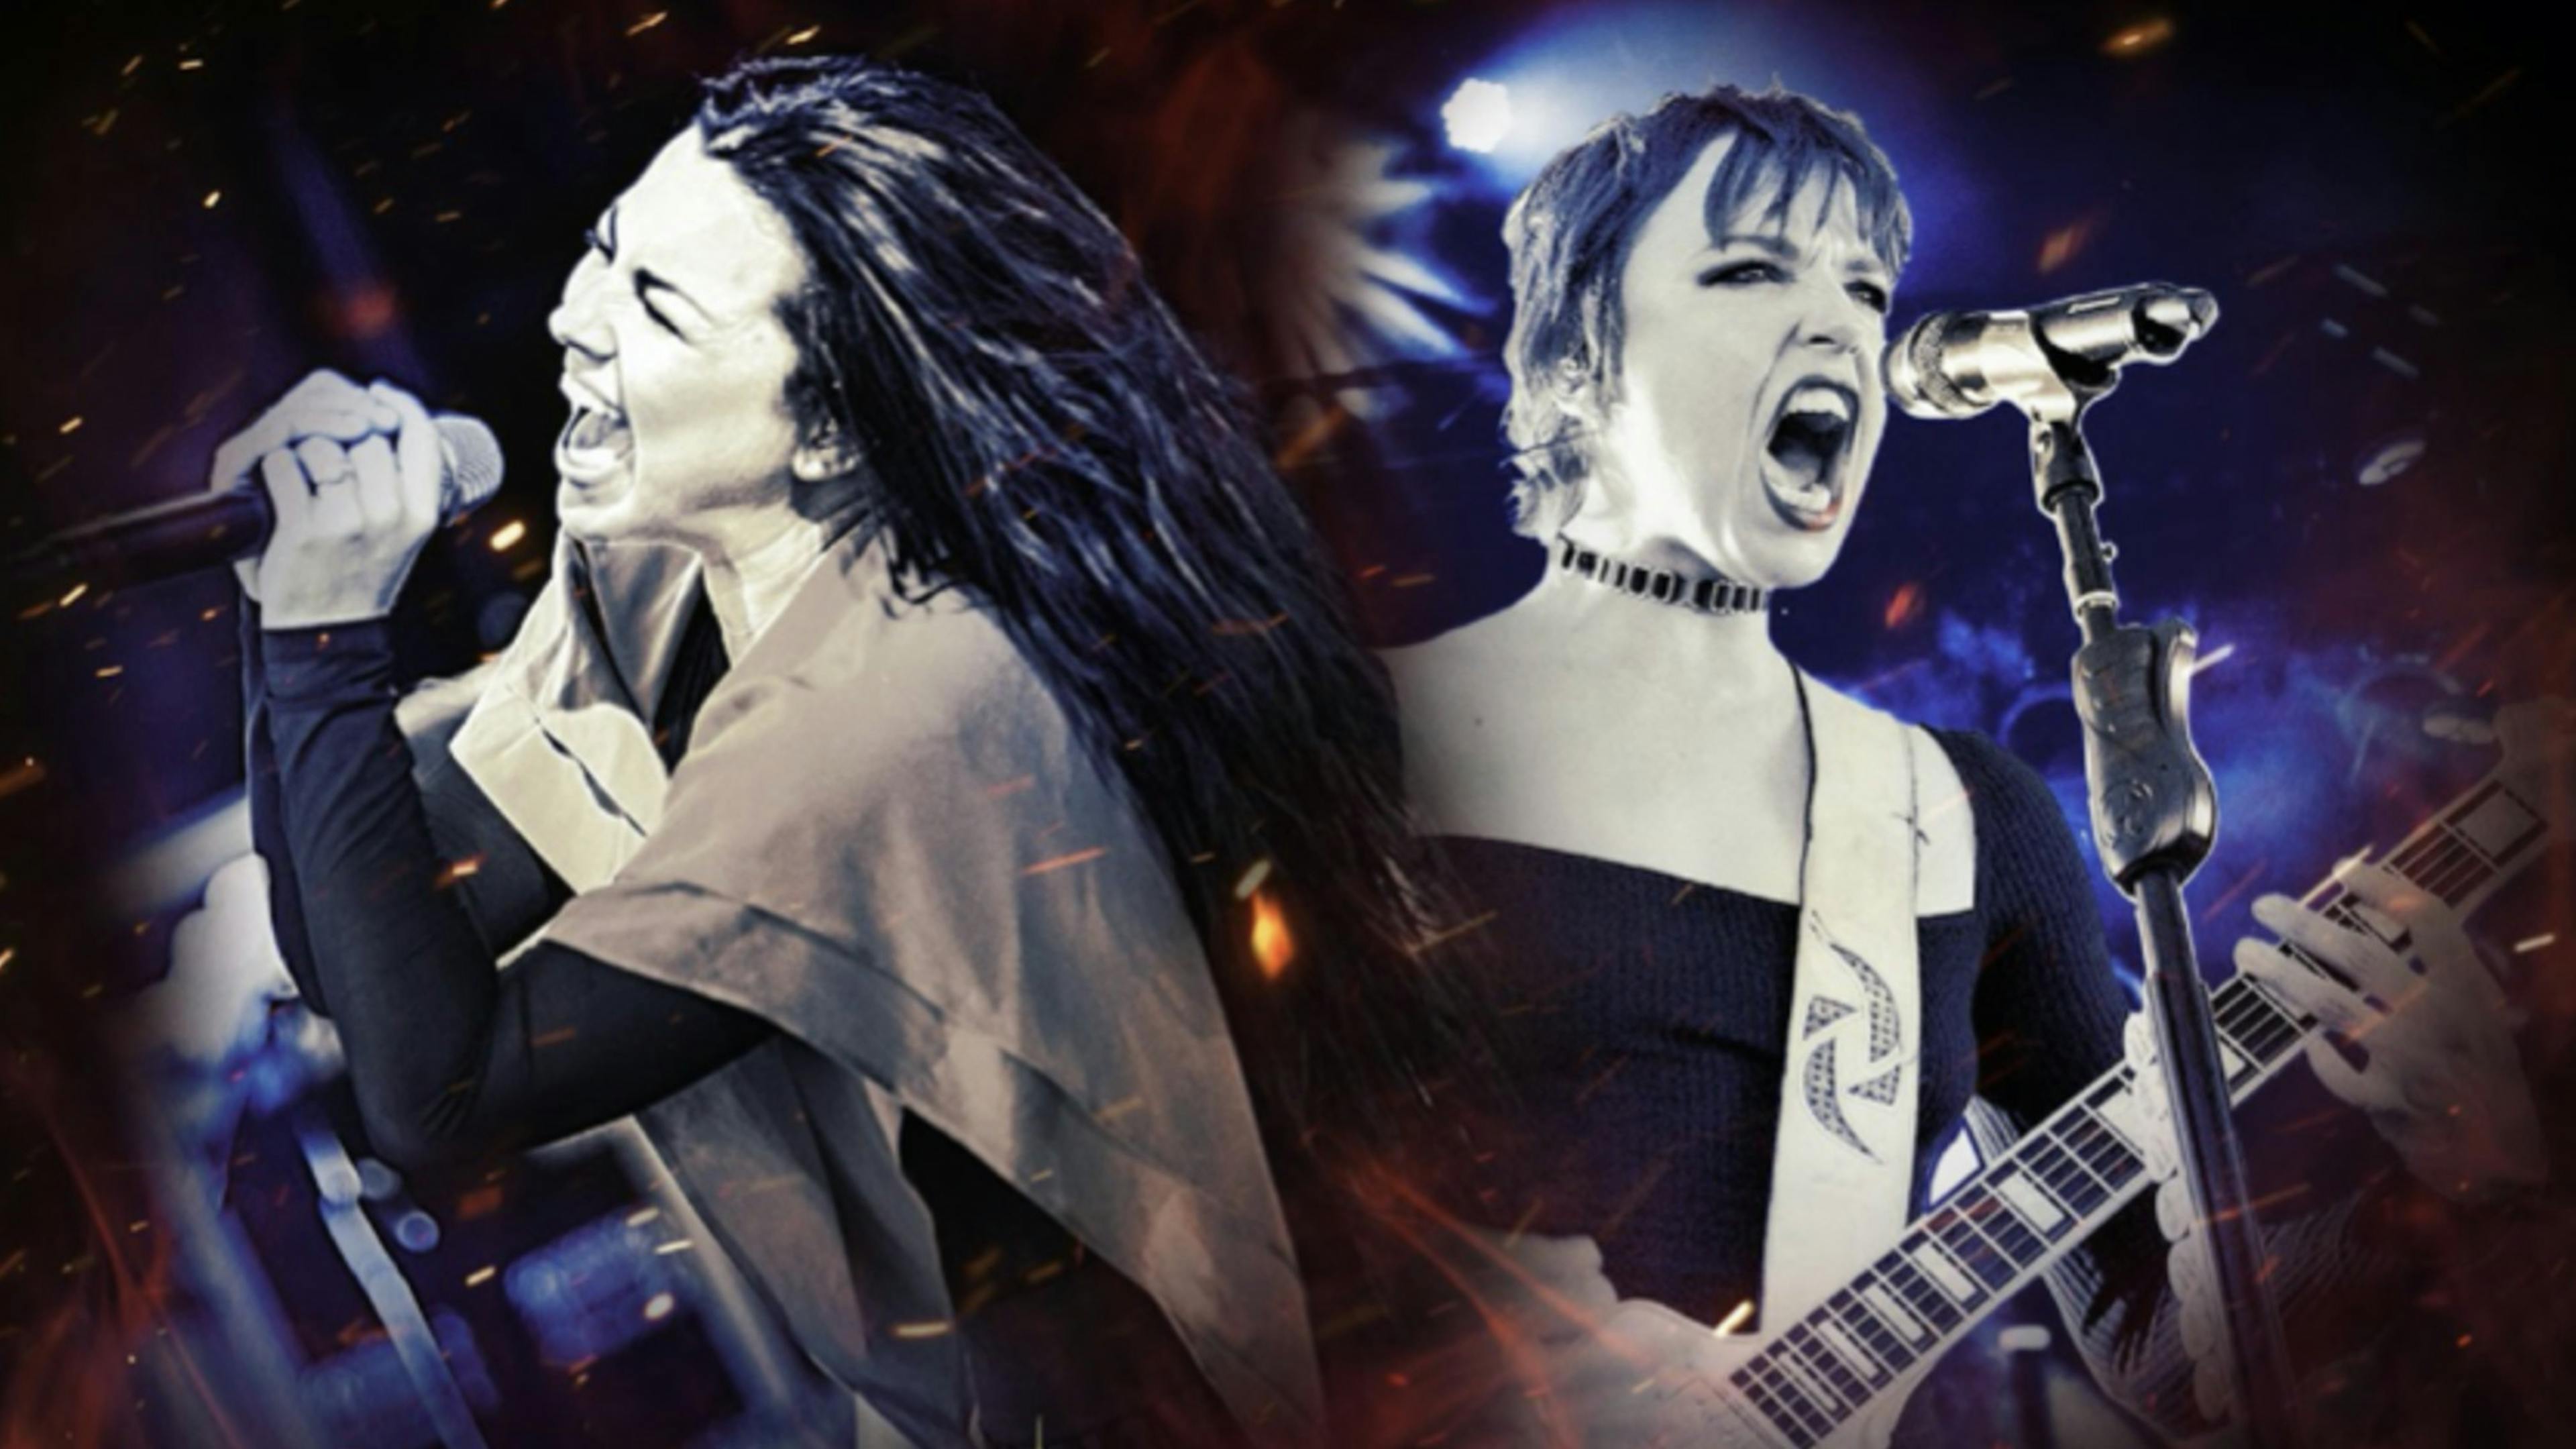 Evanescence and Halestorm announce 2021 arena tour